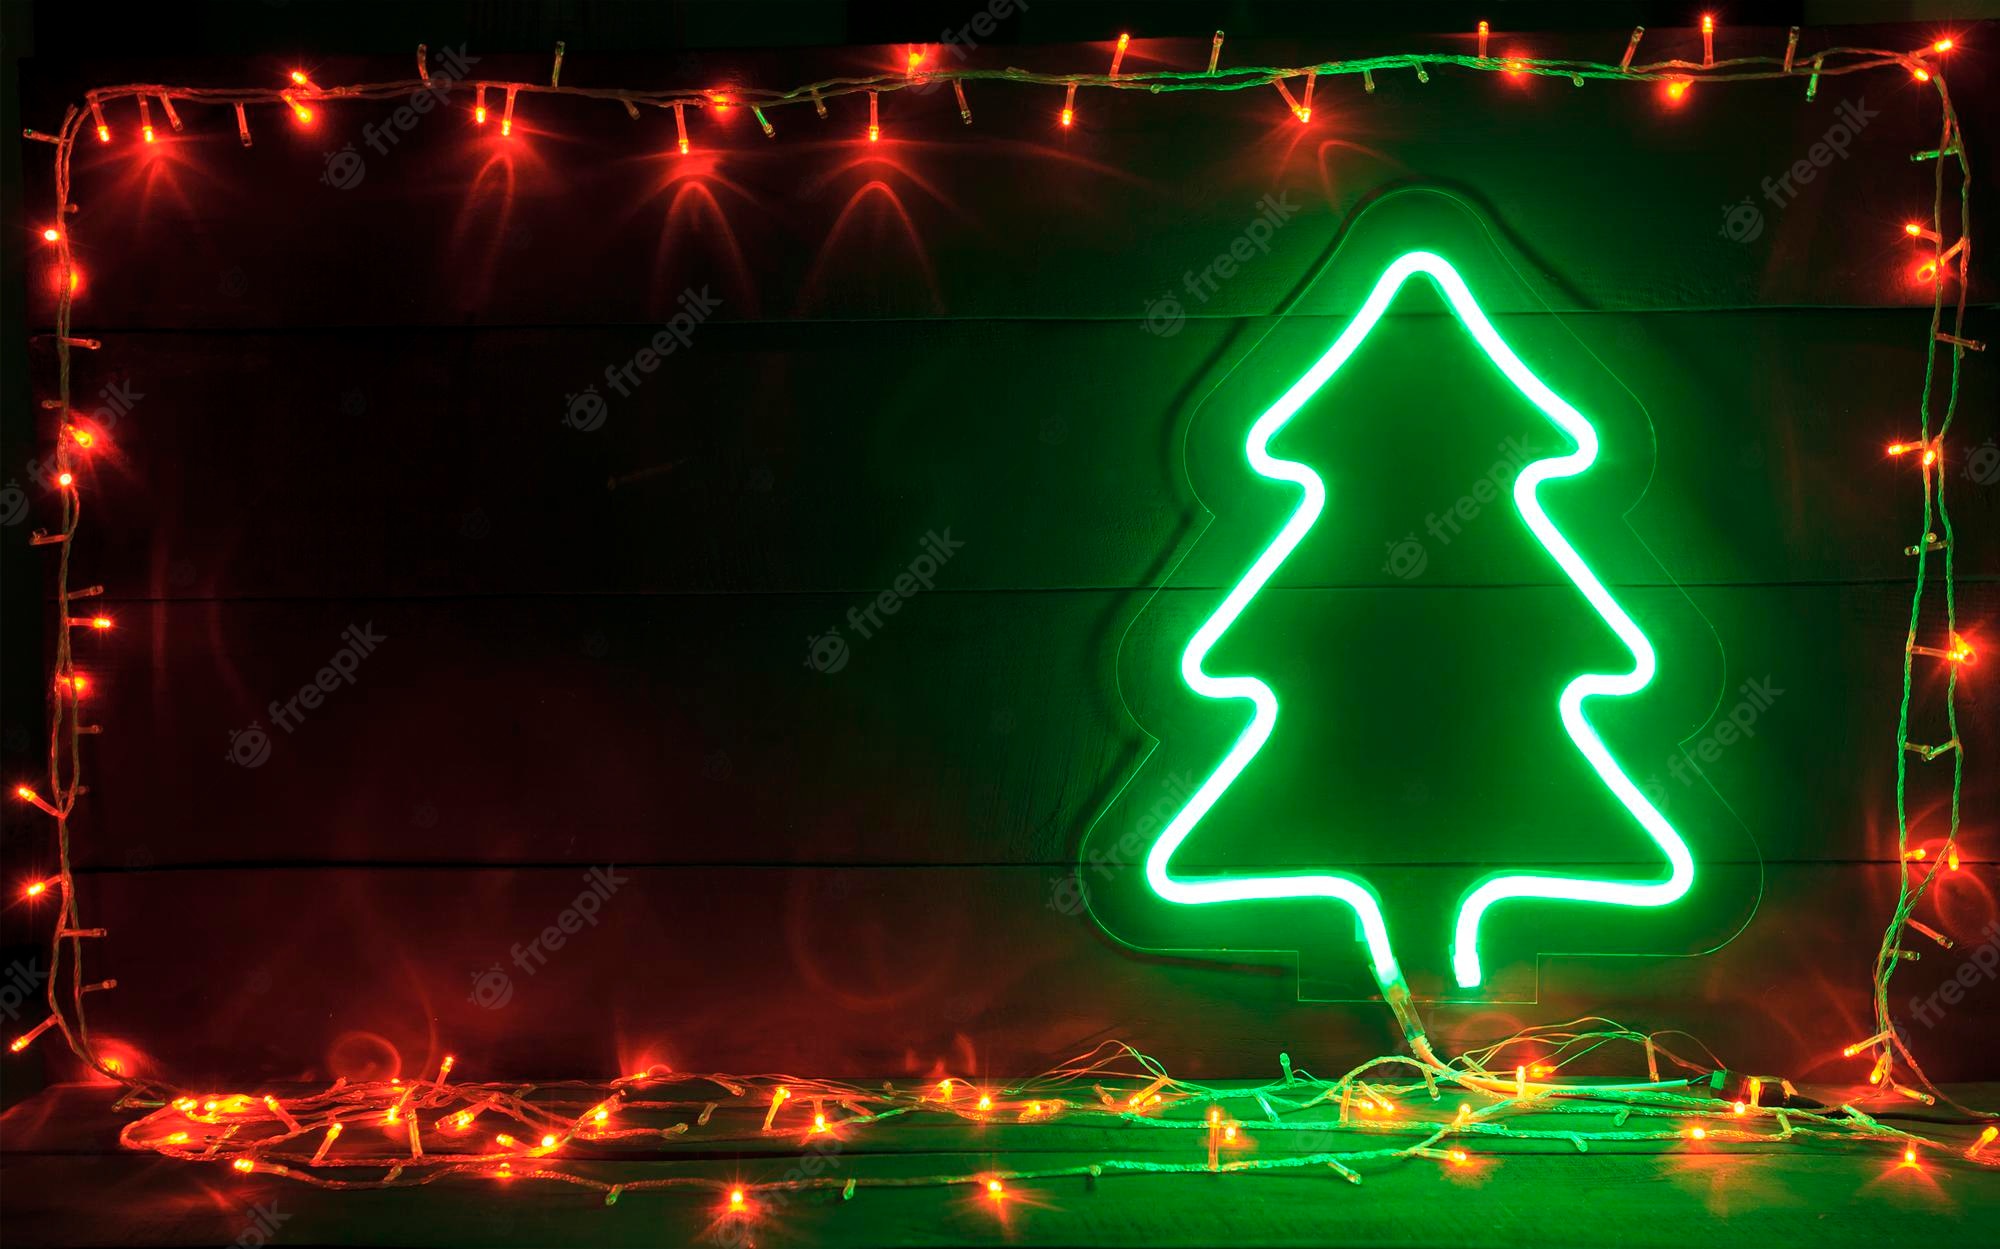 Premium Photo. The beautiful christmas background with a lot of lights and green neon christmas tree on the wooden desk